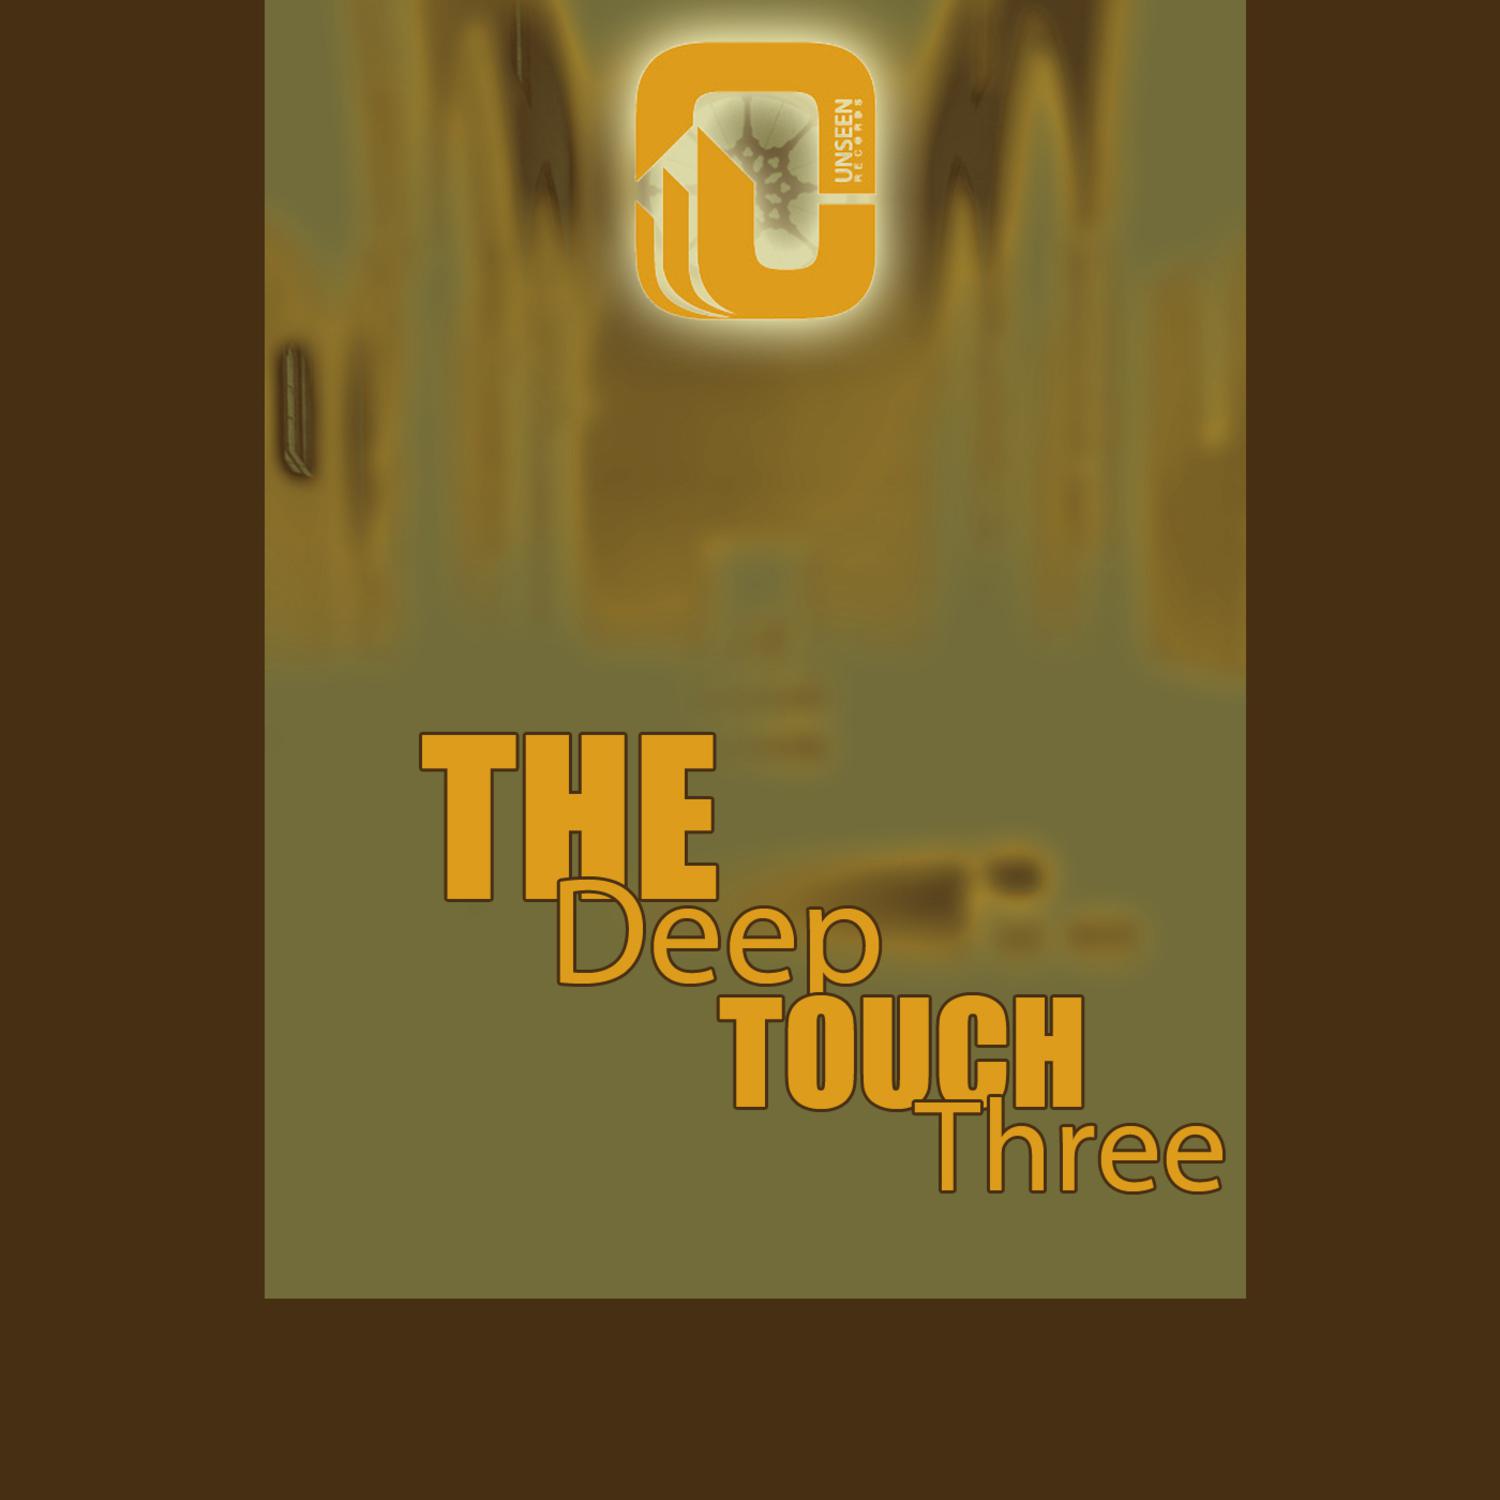 The Deep Touch Three